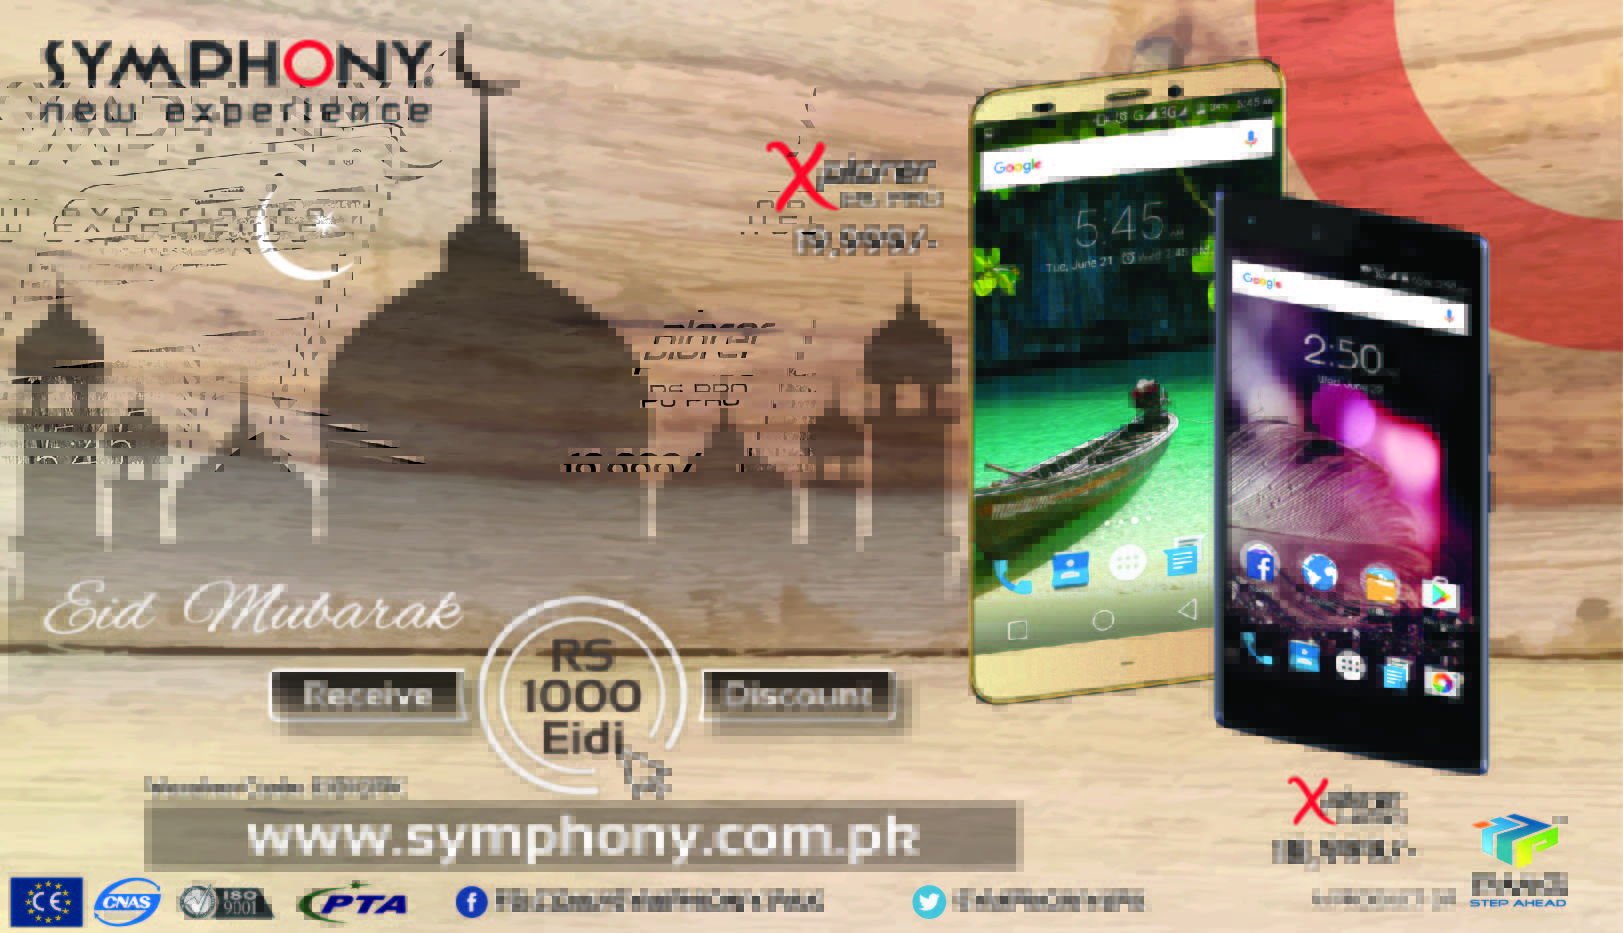 SYMPHONY MOBILE ANNOUNCED FOR RS 1000/- Eidi TO ALL PAKISTAN